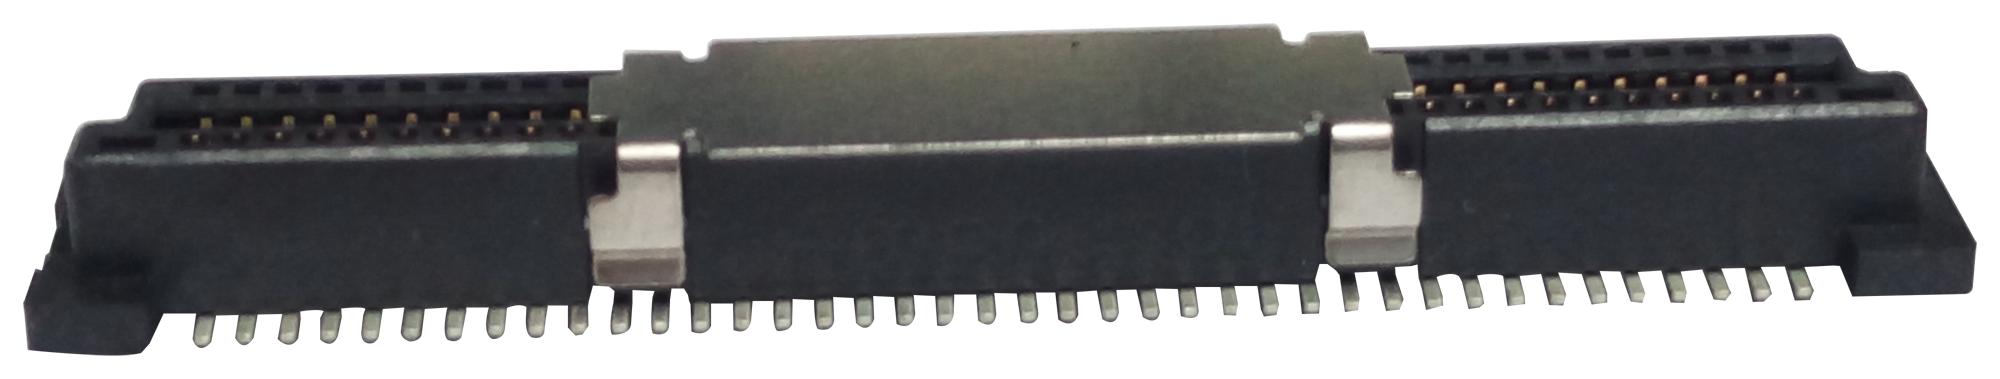 G832MB010801222HR CONNECTOR, RCPT, 80POS, 2ROW, 0.8MM AMPHENOL ICC